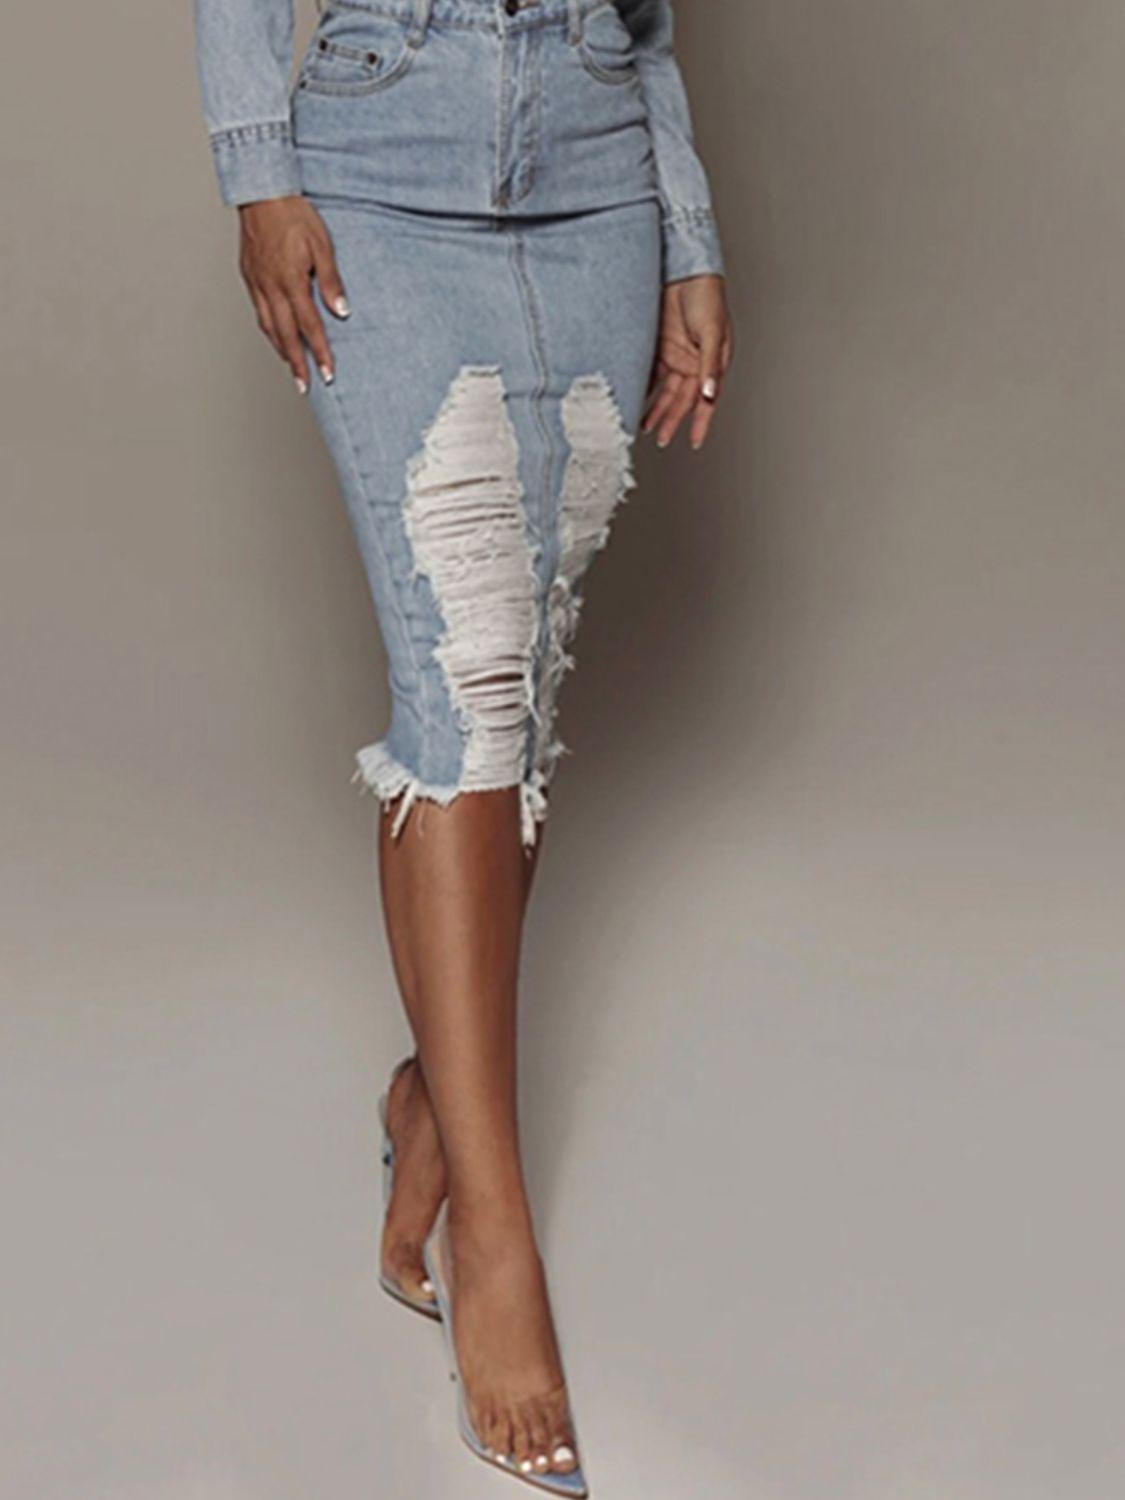 a woman in a jean skirt and heels posing for a picture